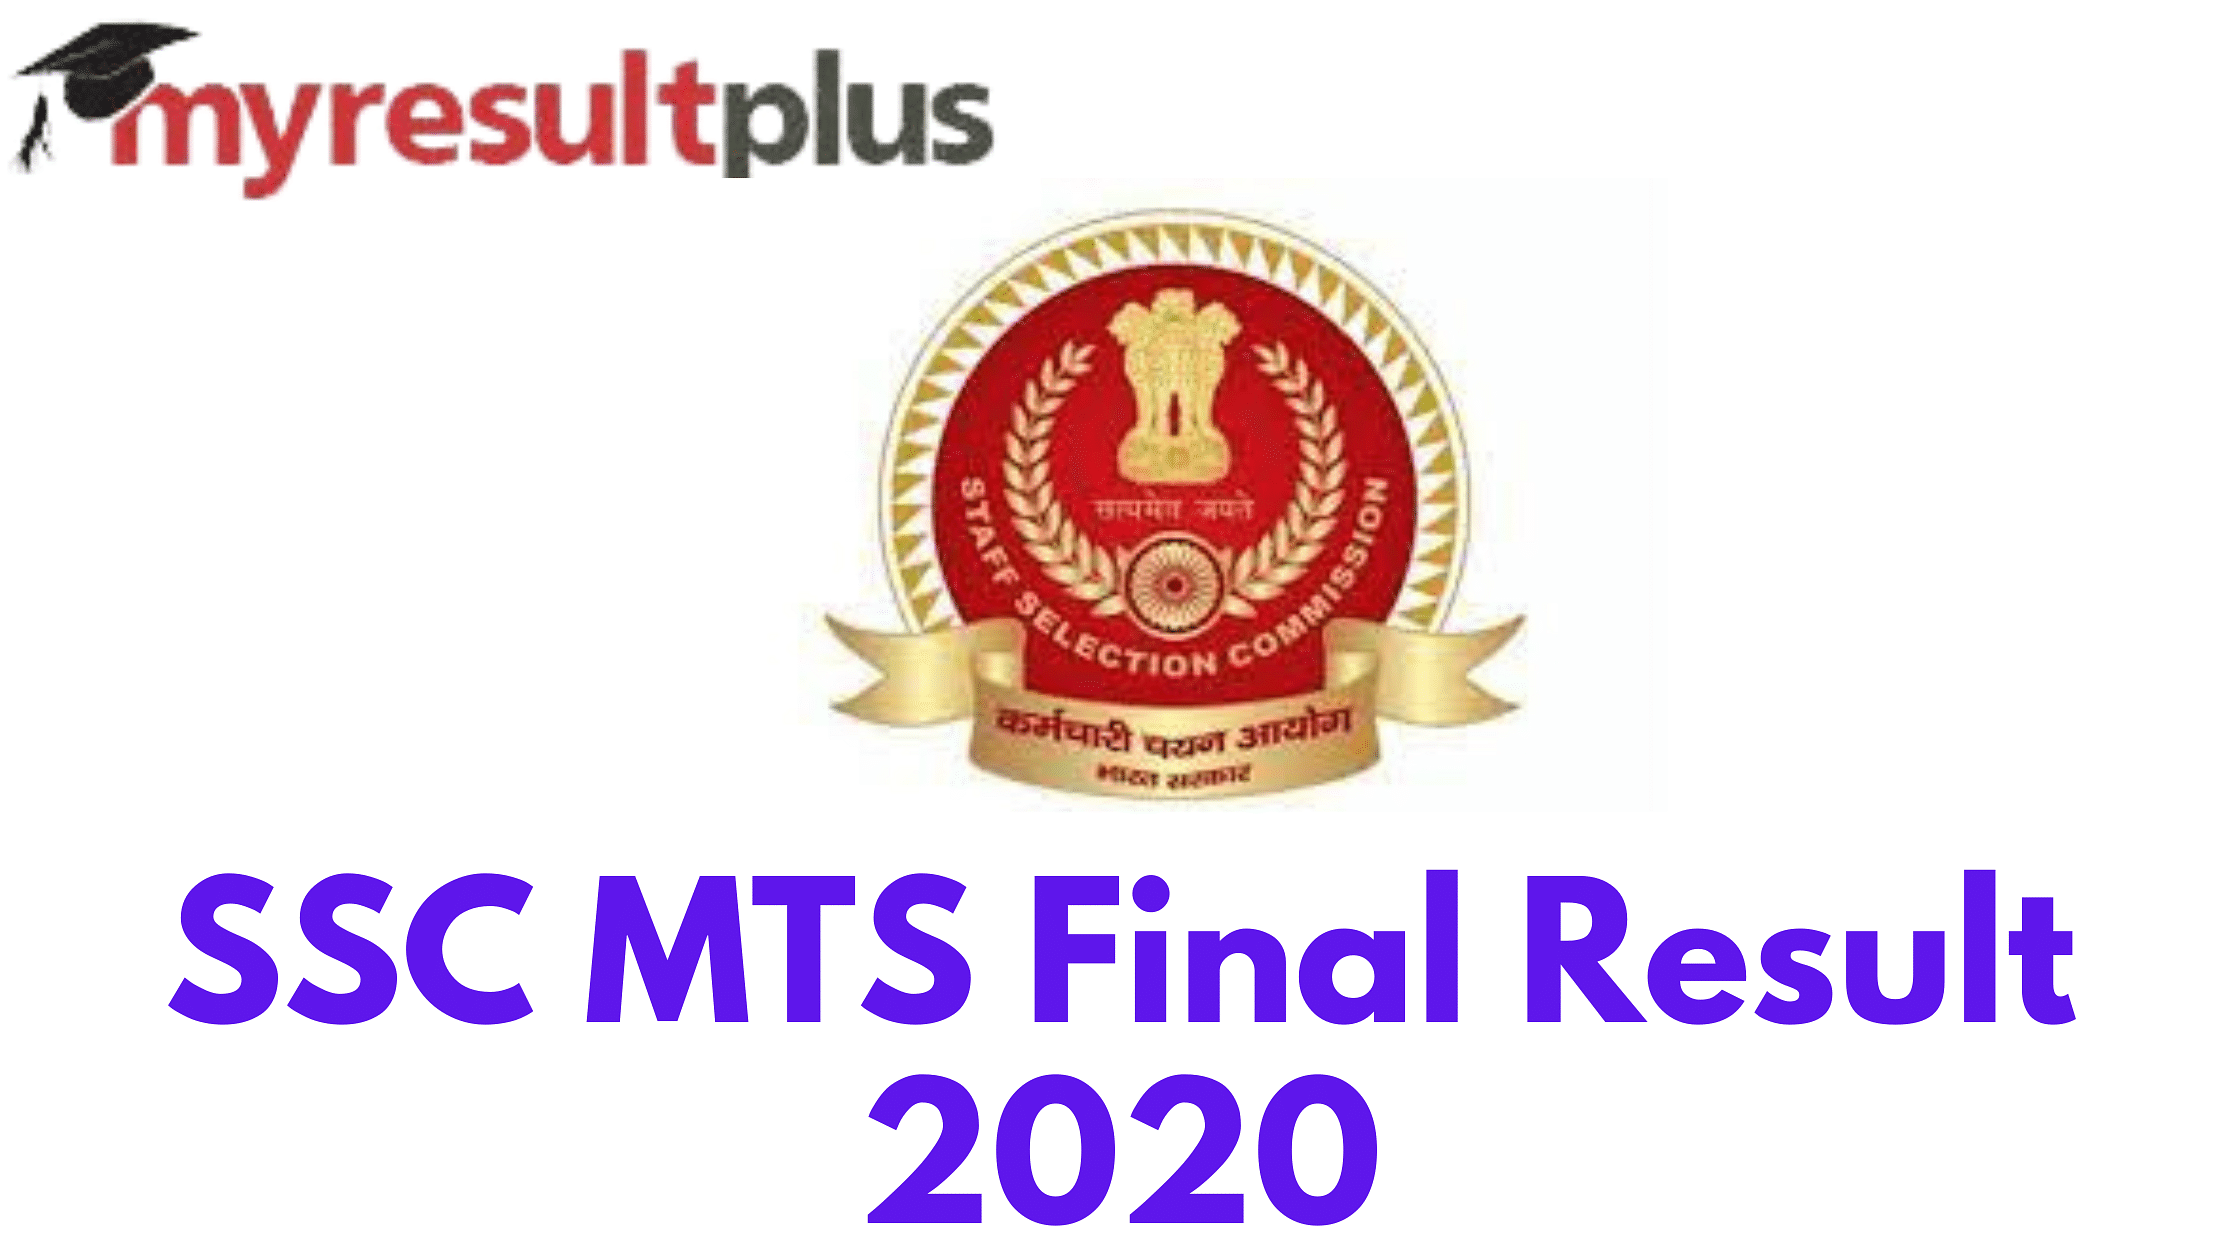 SSC MTS Final Result 2020 Announced, Know How to Check Here